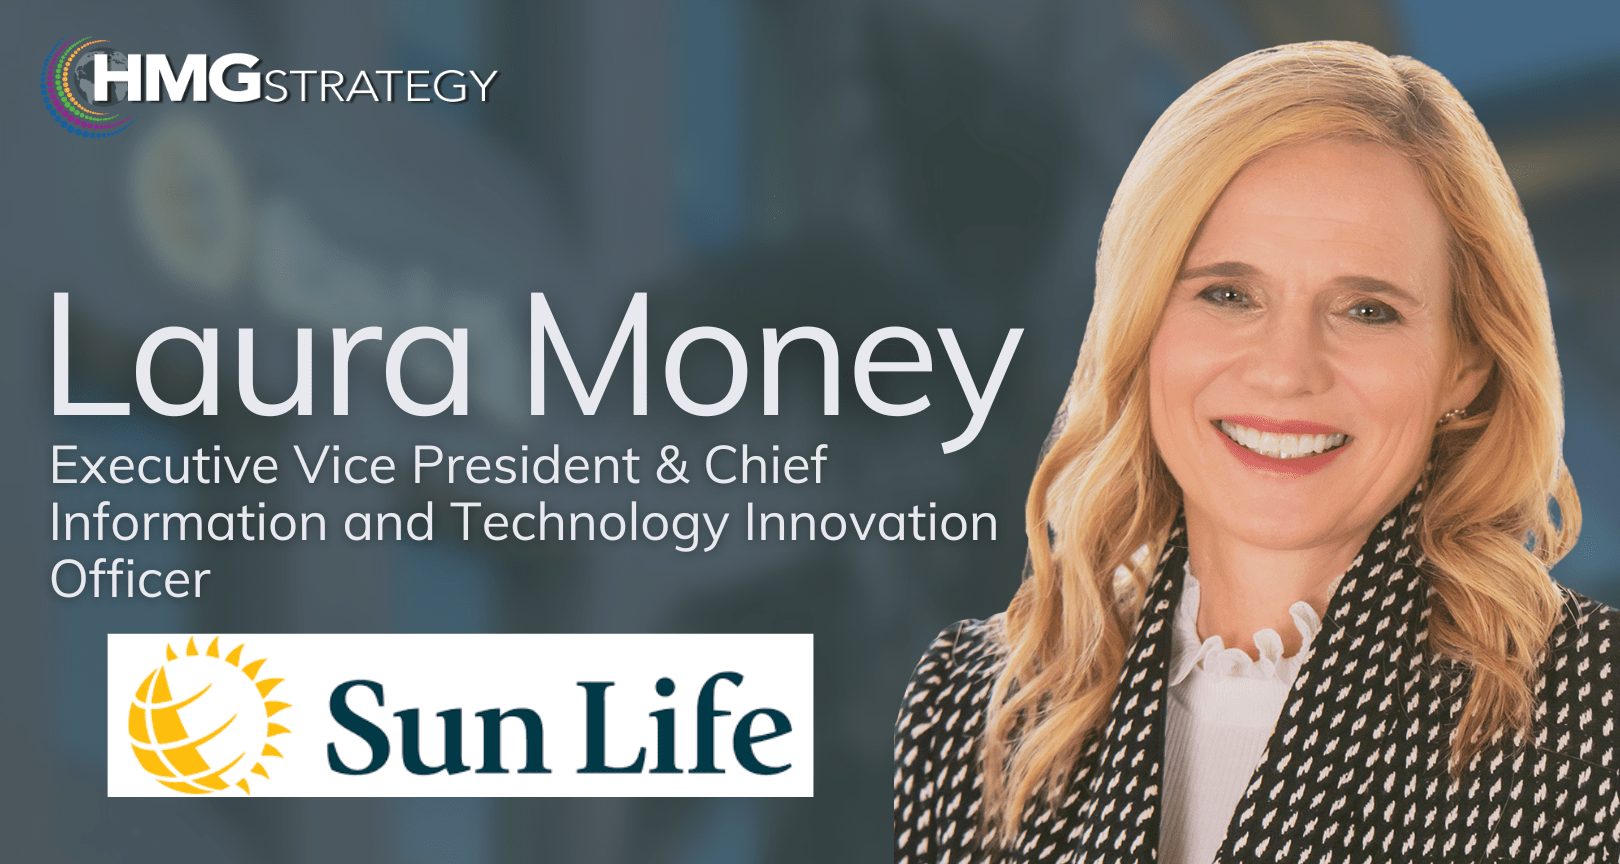 Laura Money, EVP, Chief Information & Technology Innovation Officer, Sun Life: Fostering a Purpose-led Transformation, Executive Vice President & Chief Information and Technology Innovation Officer, of Sun Life